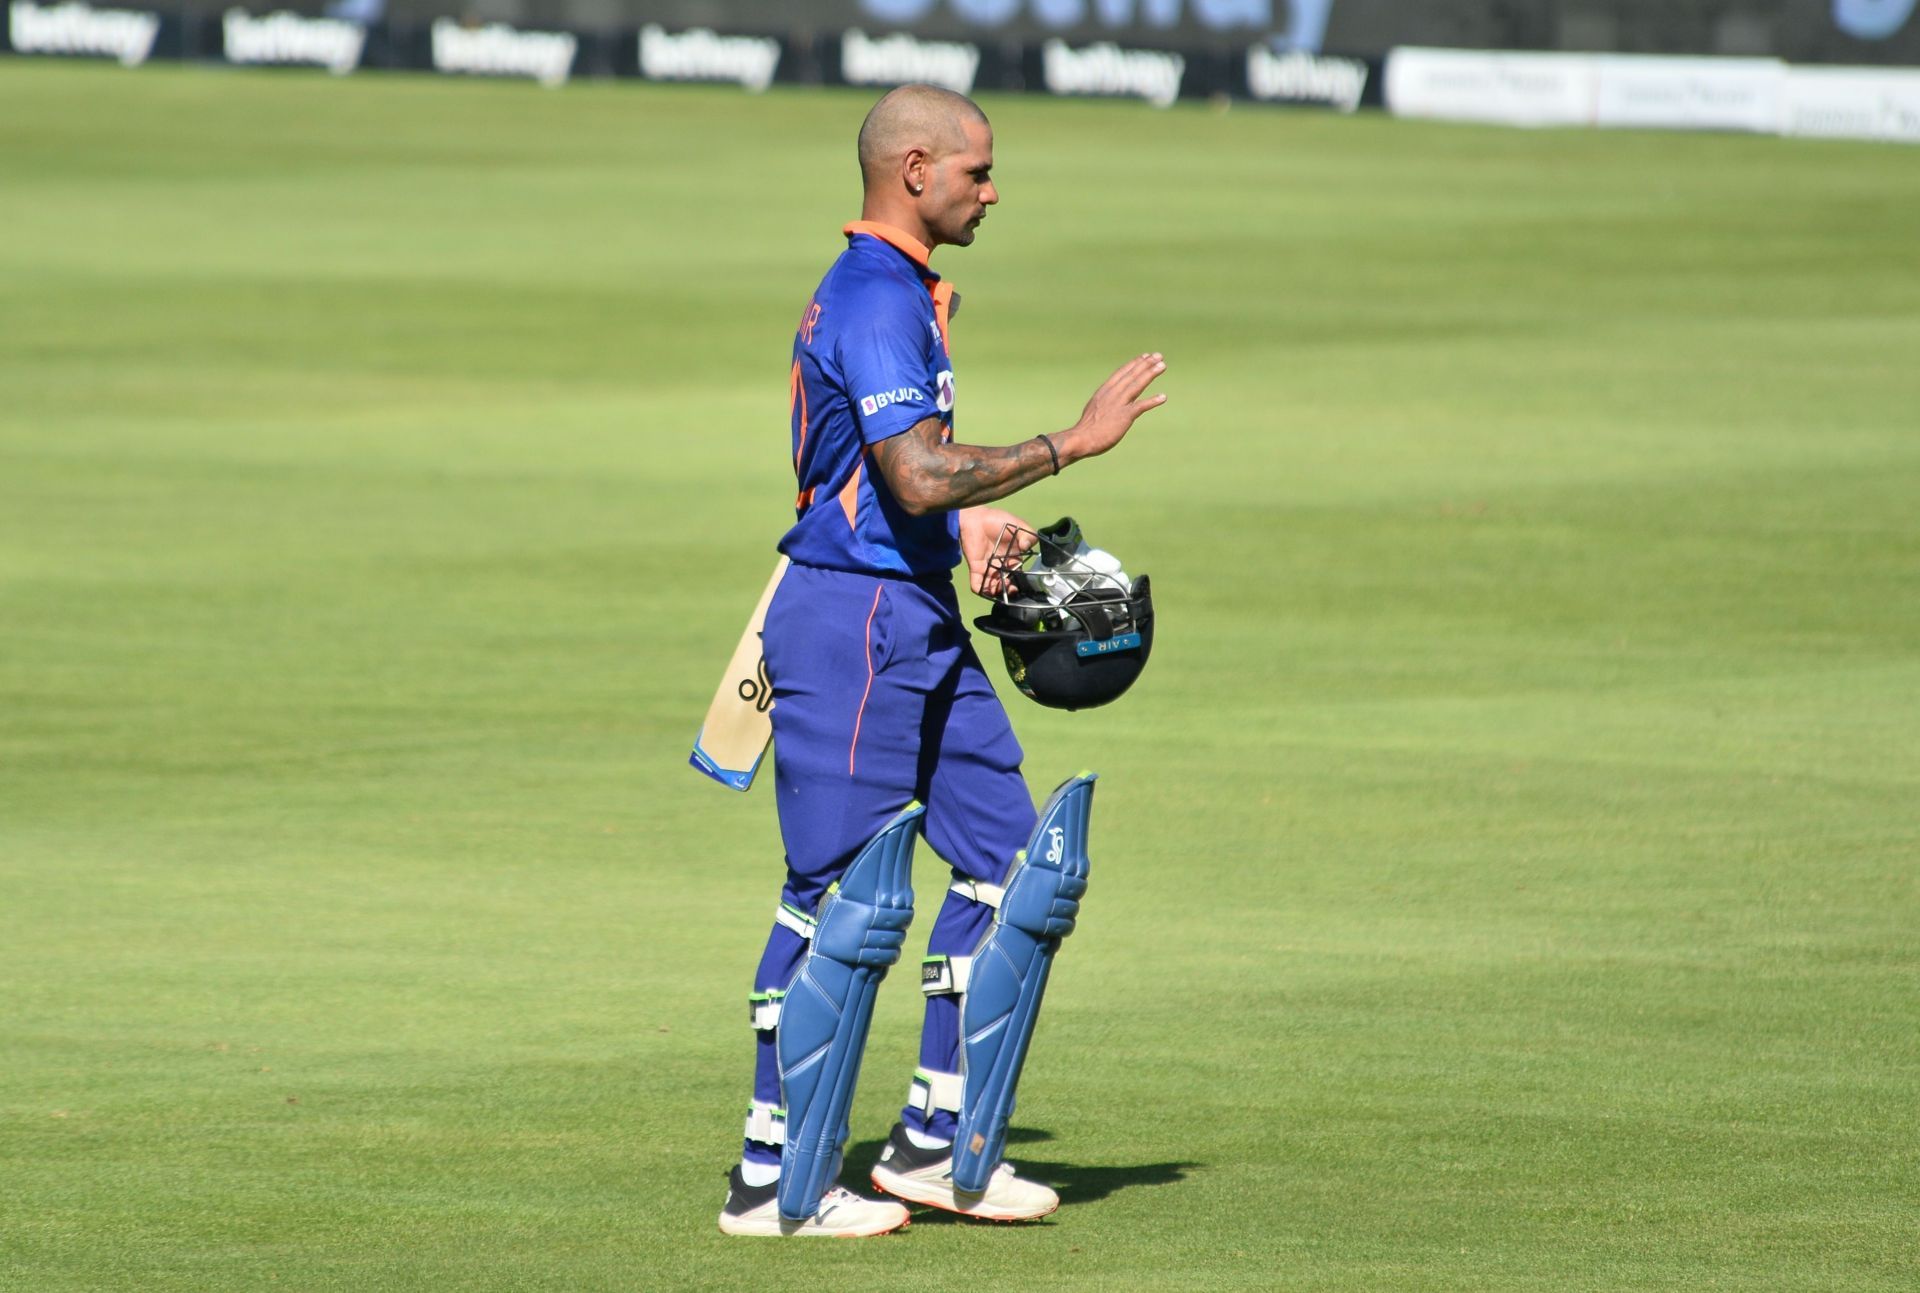 Dhawan failed to capitalize on his starts